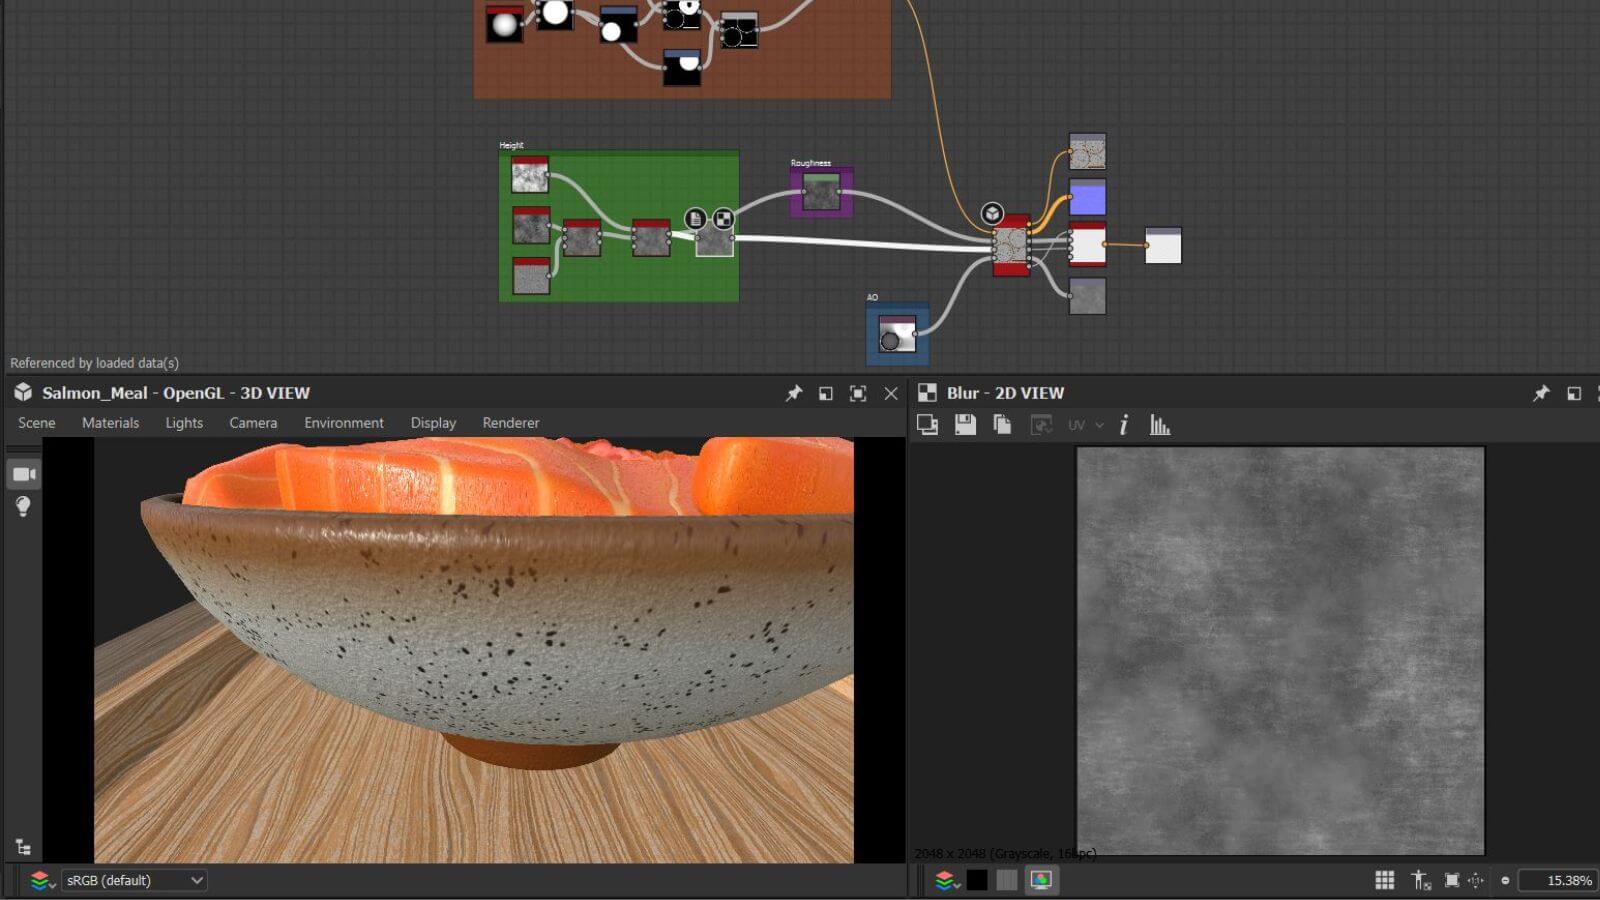 Workflow chart and bowl image in Substance 3D Designer